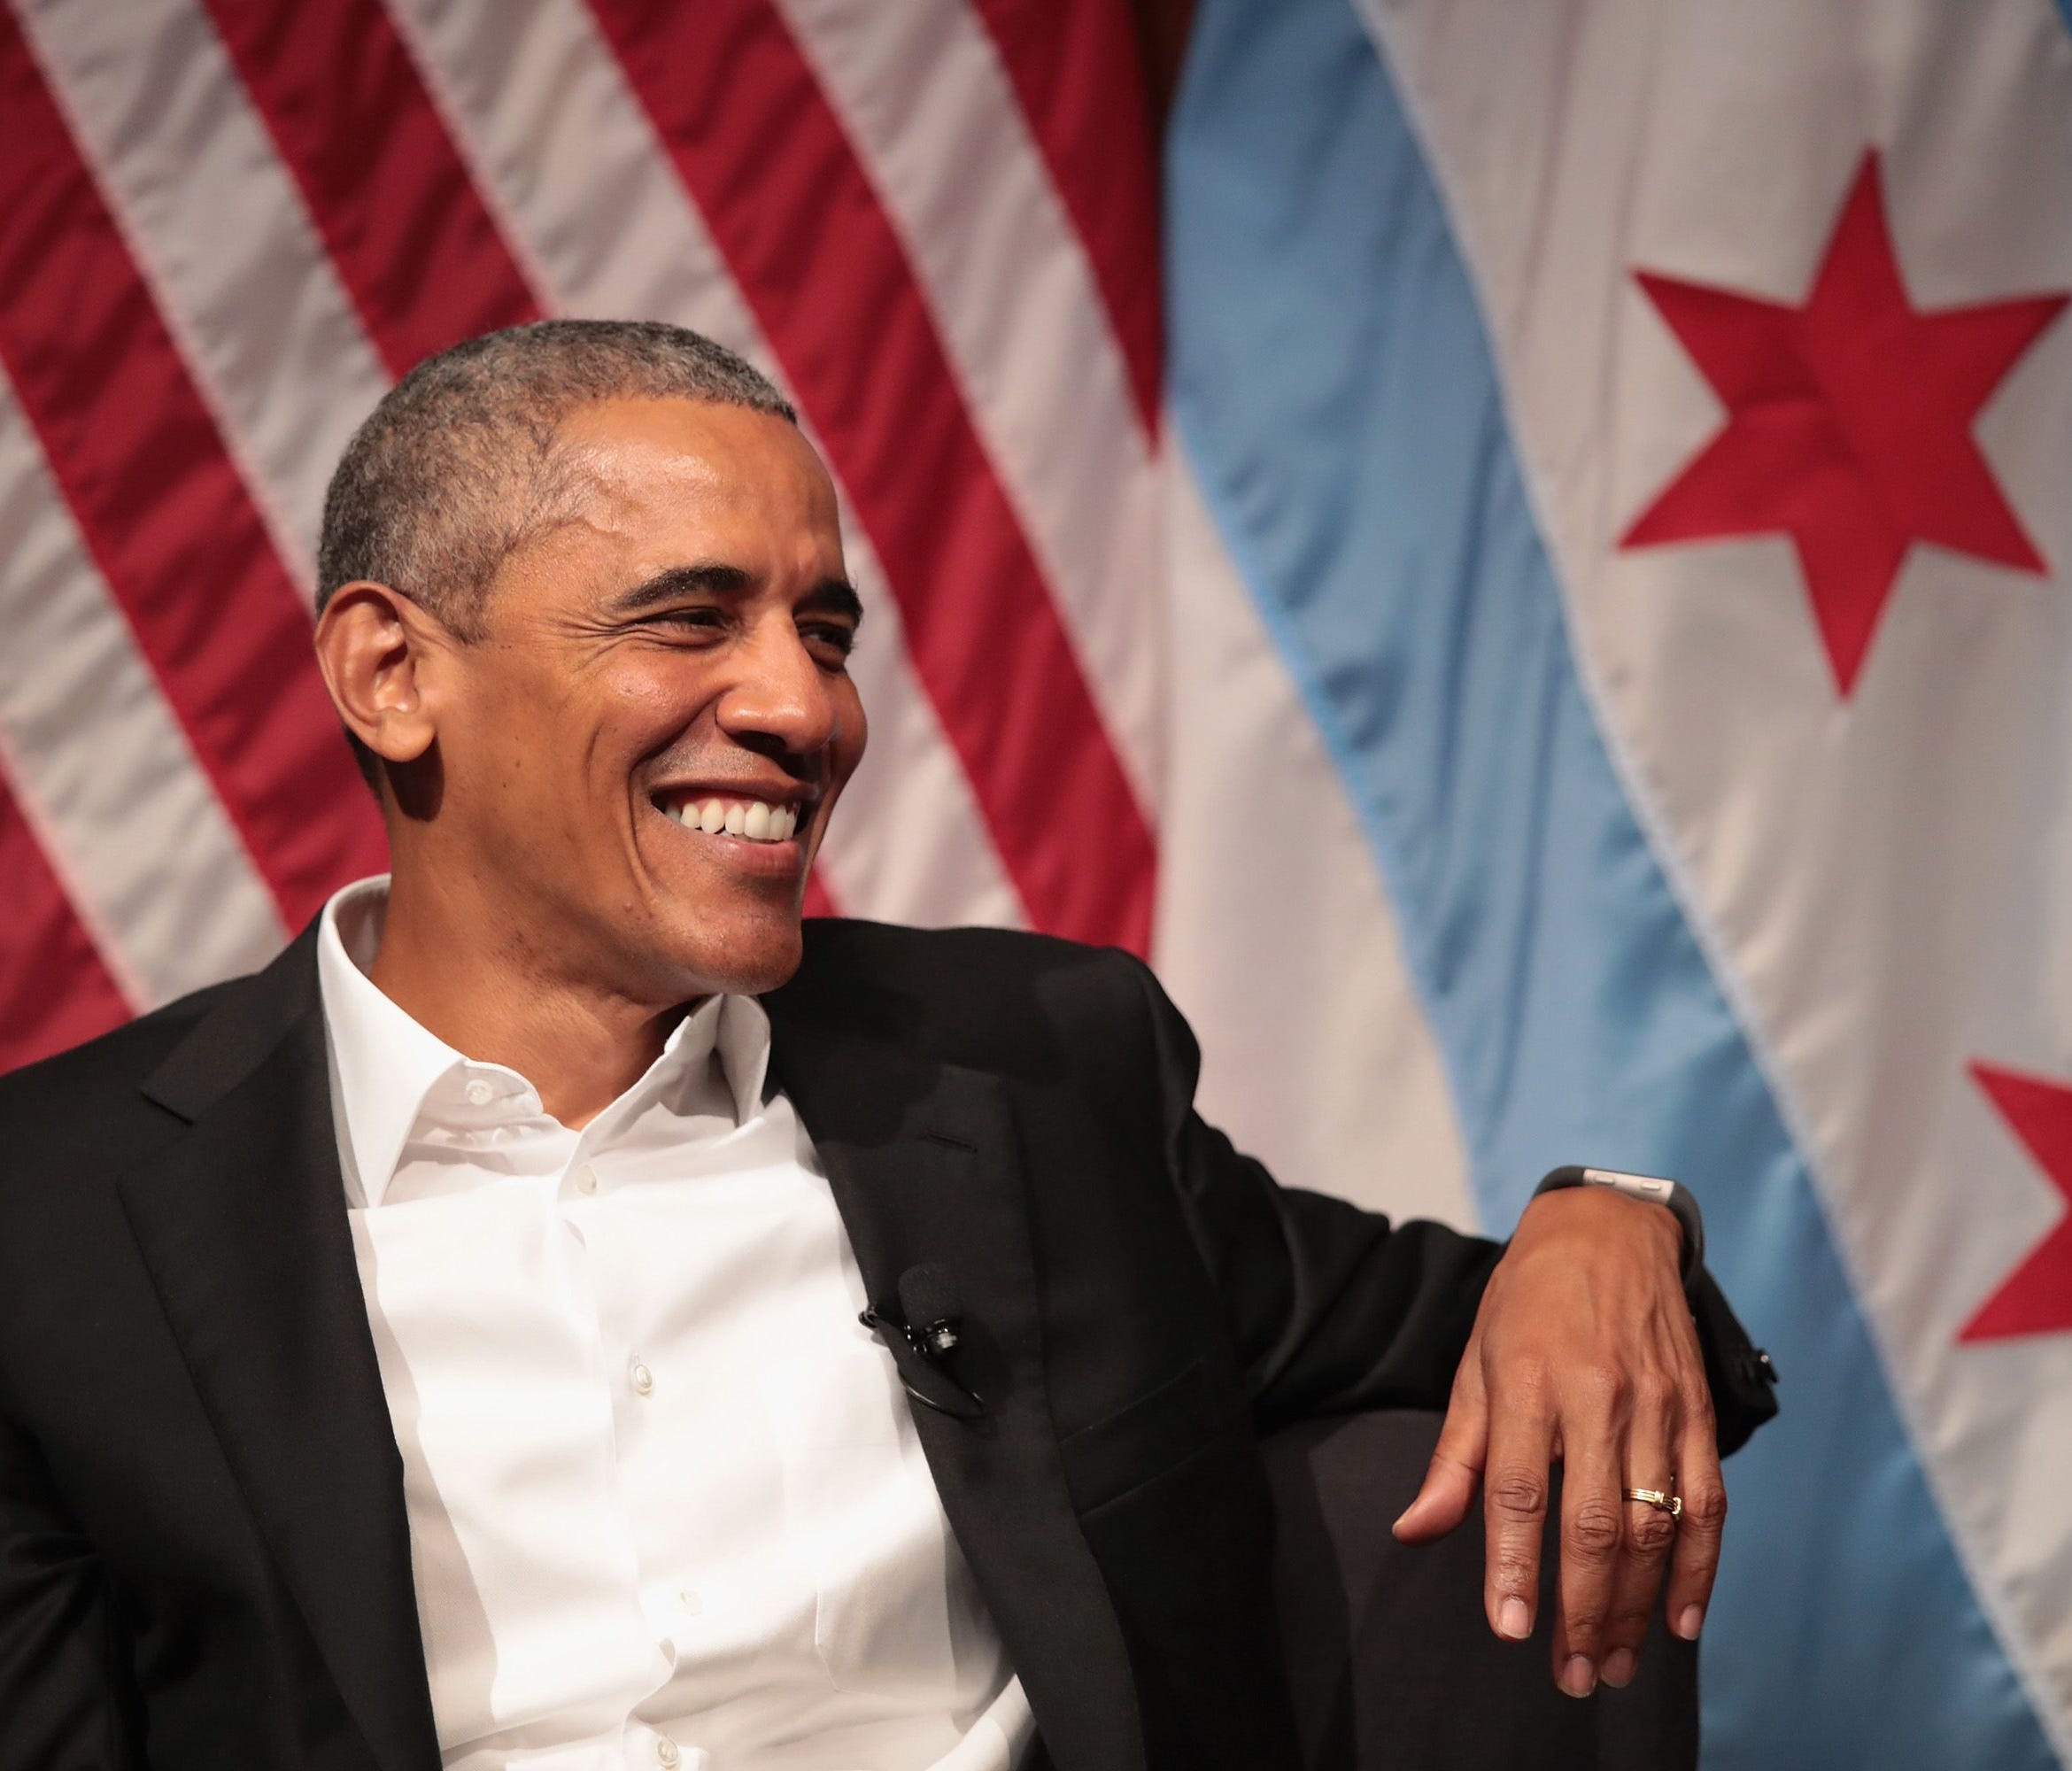 Former president Barack Obama visits with youth leaders at the University of Chicago to help promote community organizing on April 24 in Chicago. The visit marked Obama's first formal public appearance since leaving office.